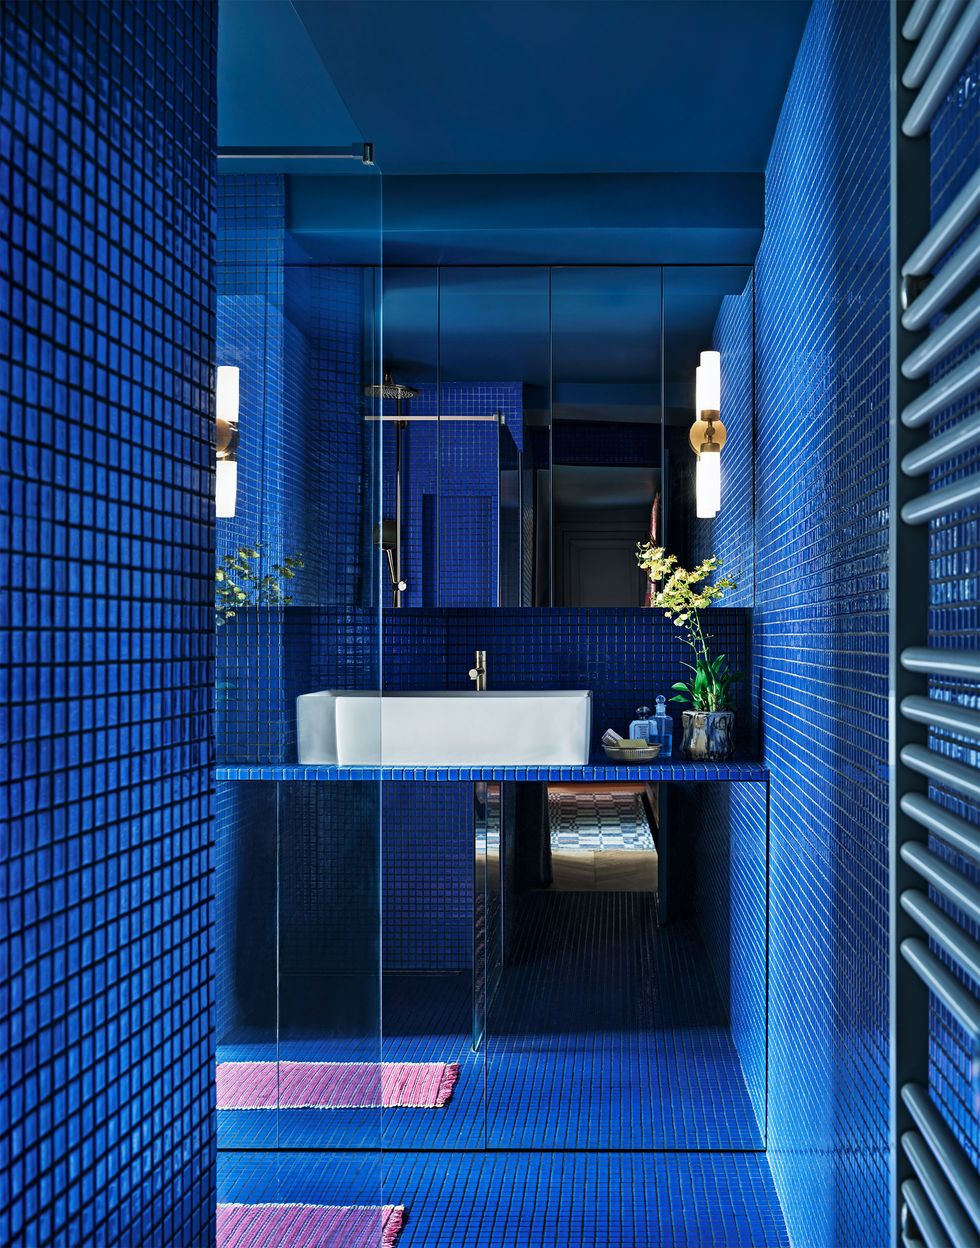 all vibrant blue tiled bathroom with a small pink rug